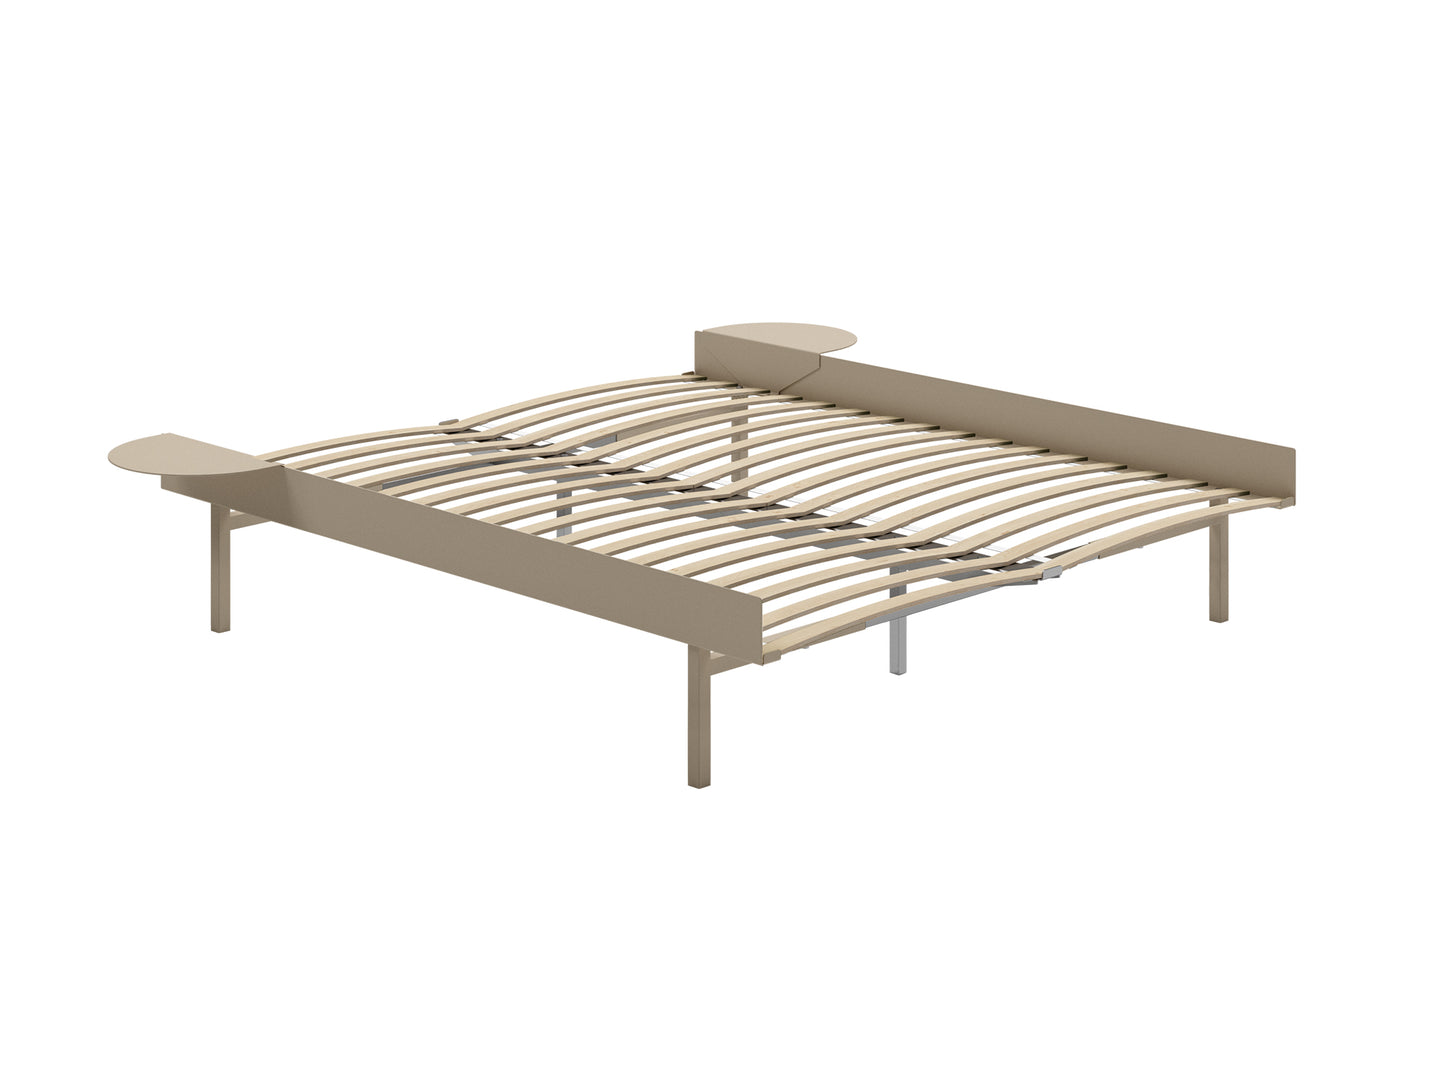 Bed 90 - 180 cm (High) by Moebe- Bed Frame / with 160cm wide Slats / 2 Side Table /  Sand